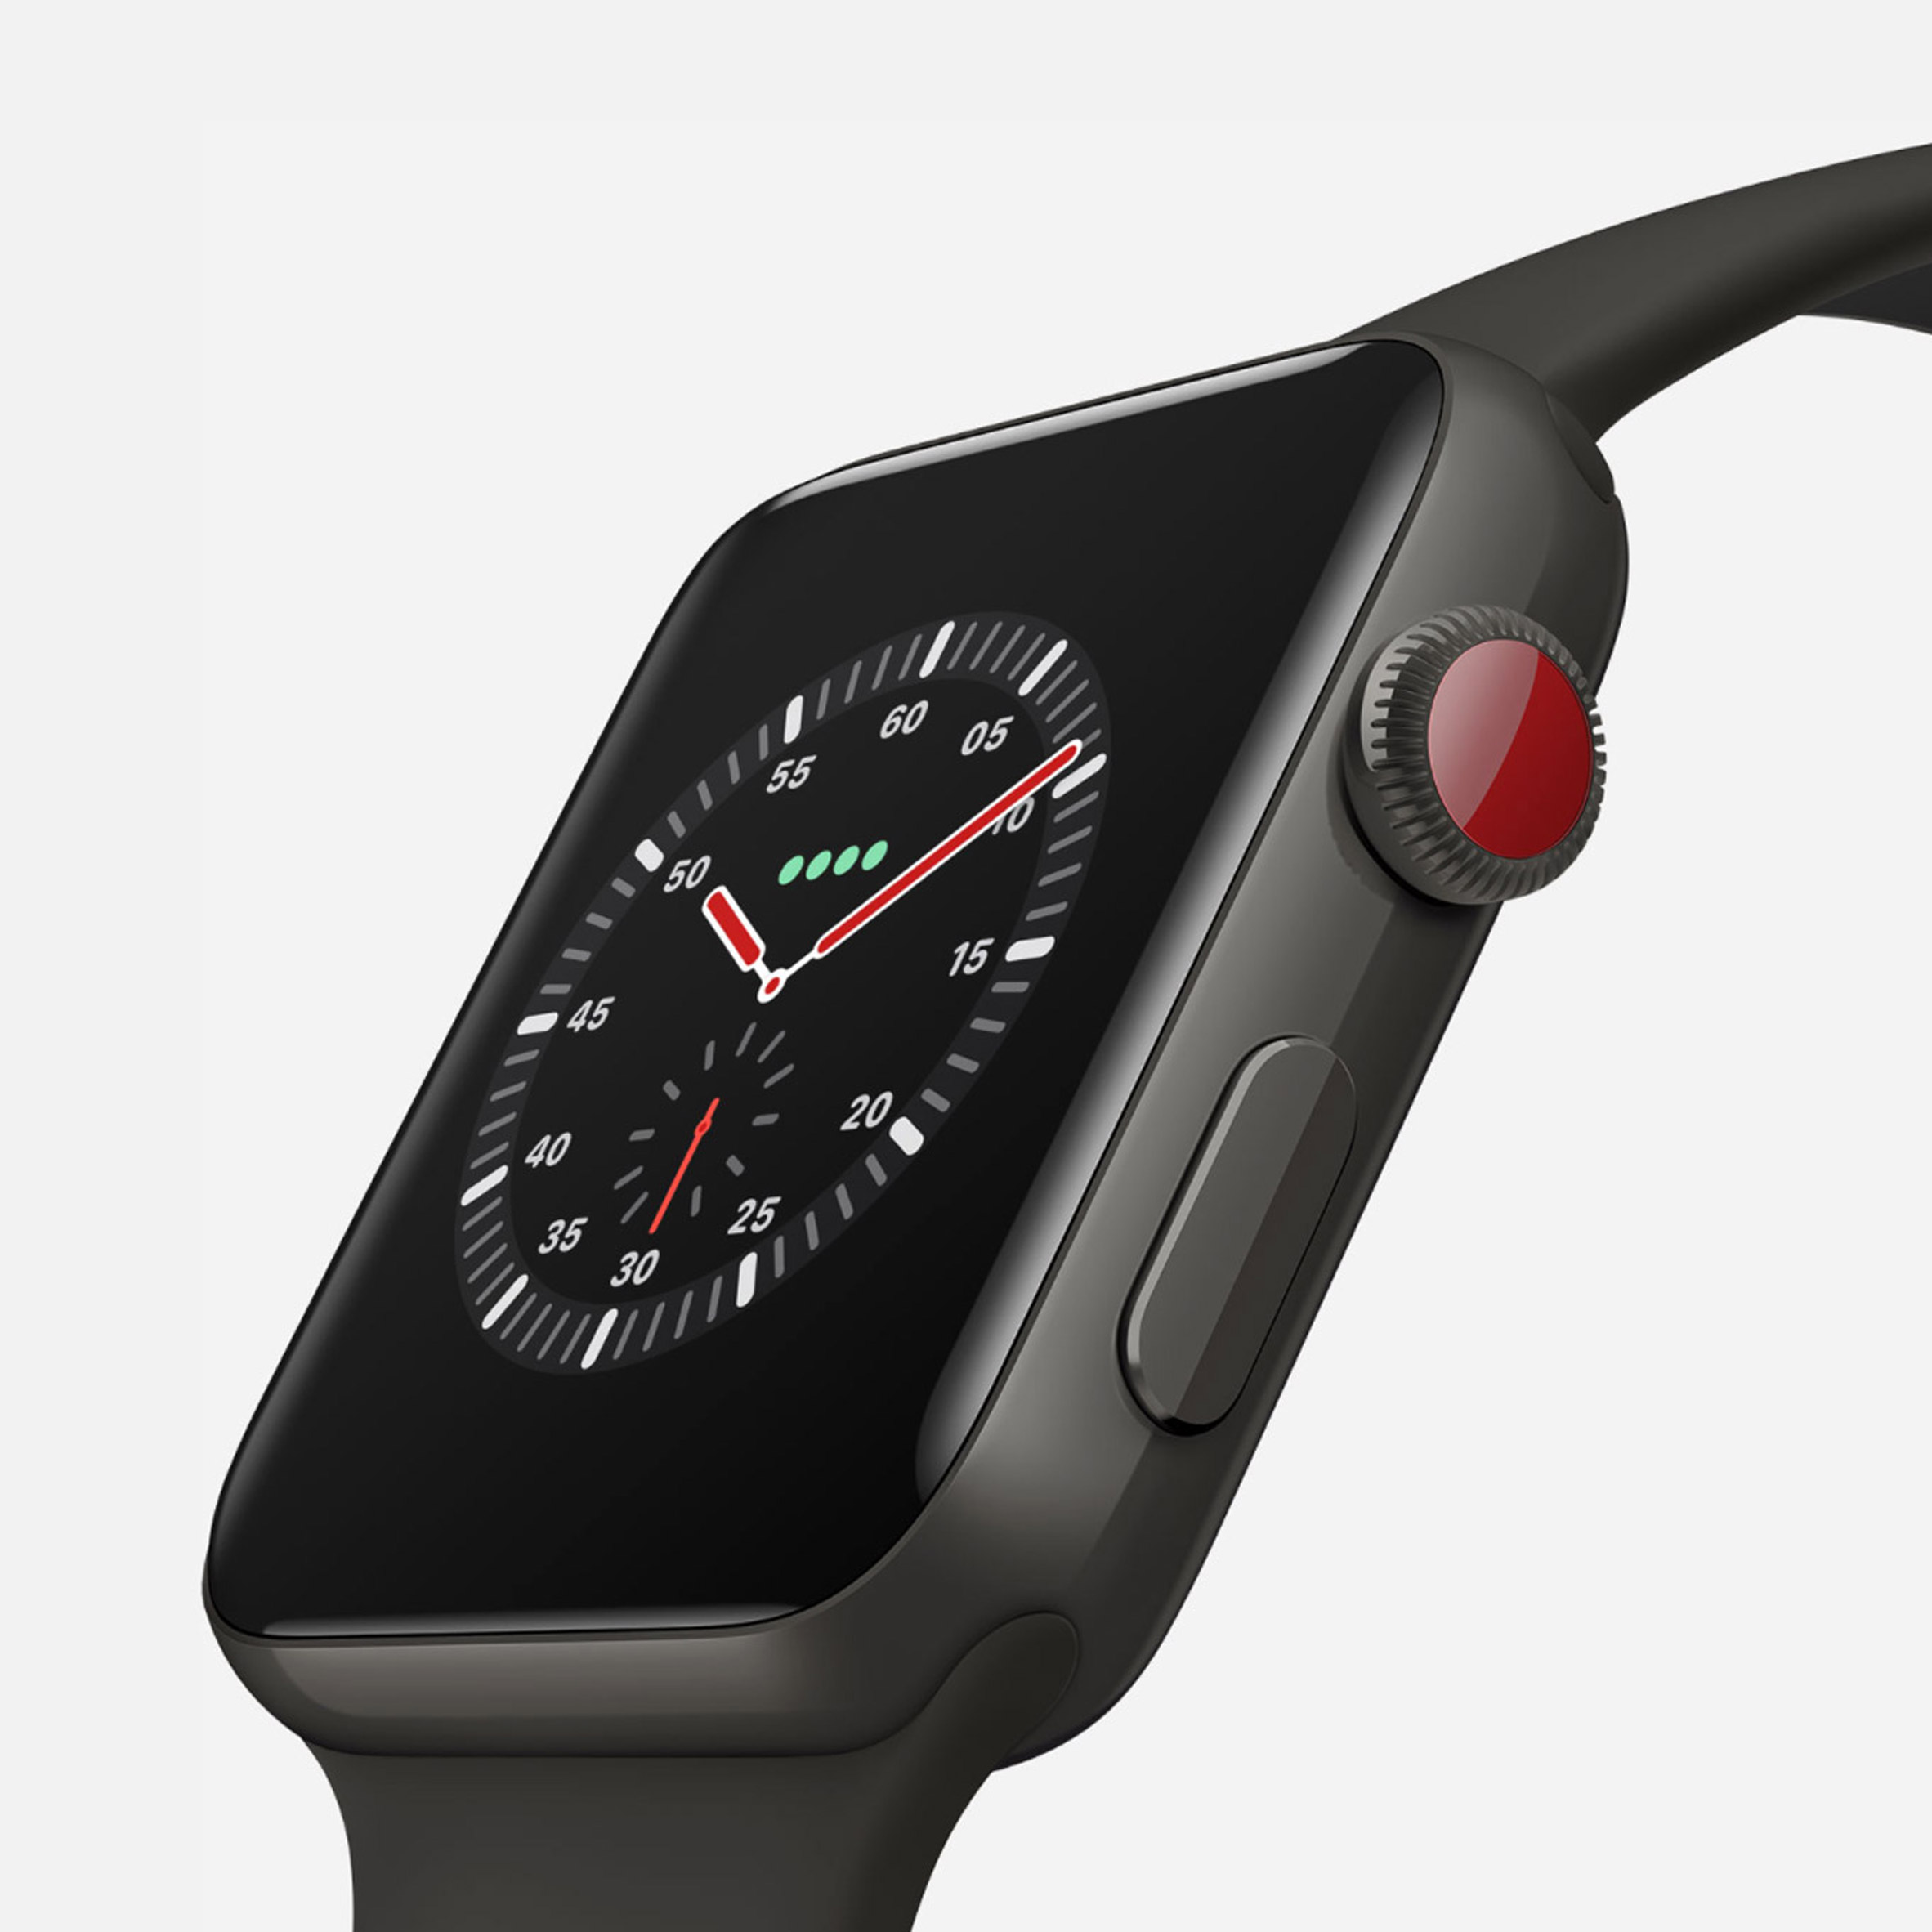 Apple Watch Series 3 features built-in cellular and more - Apple